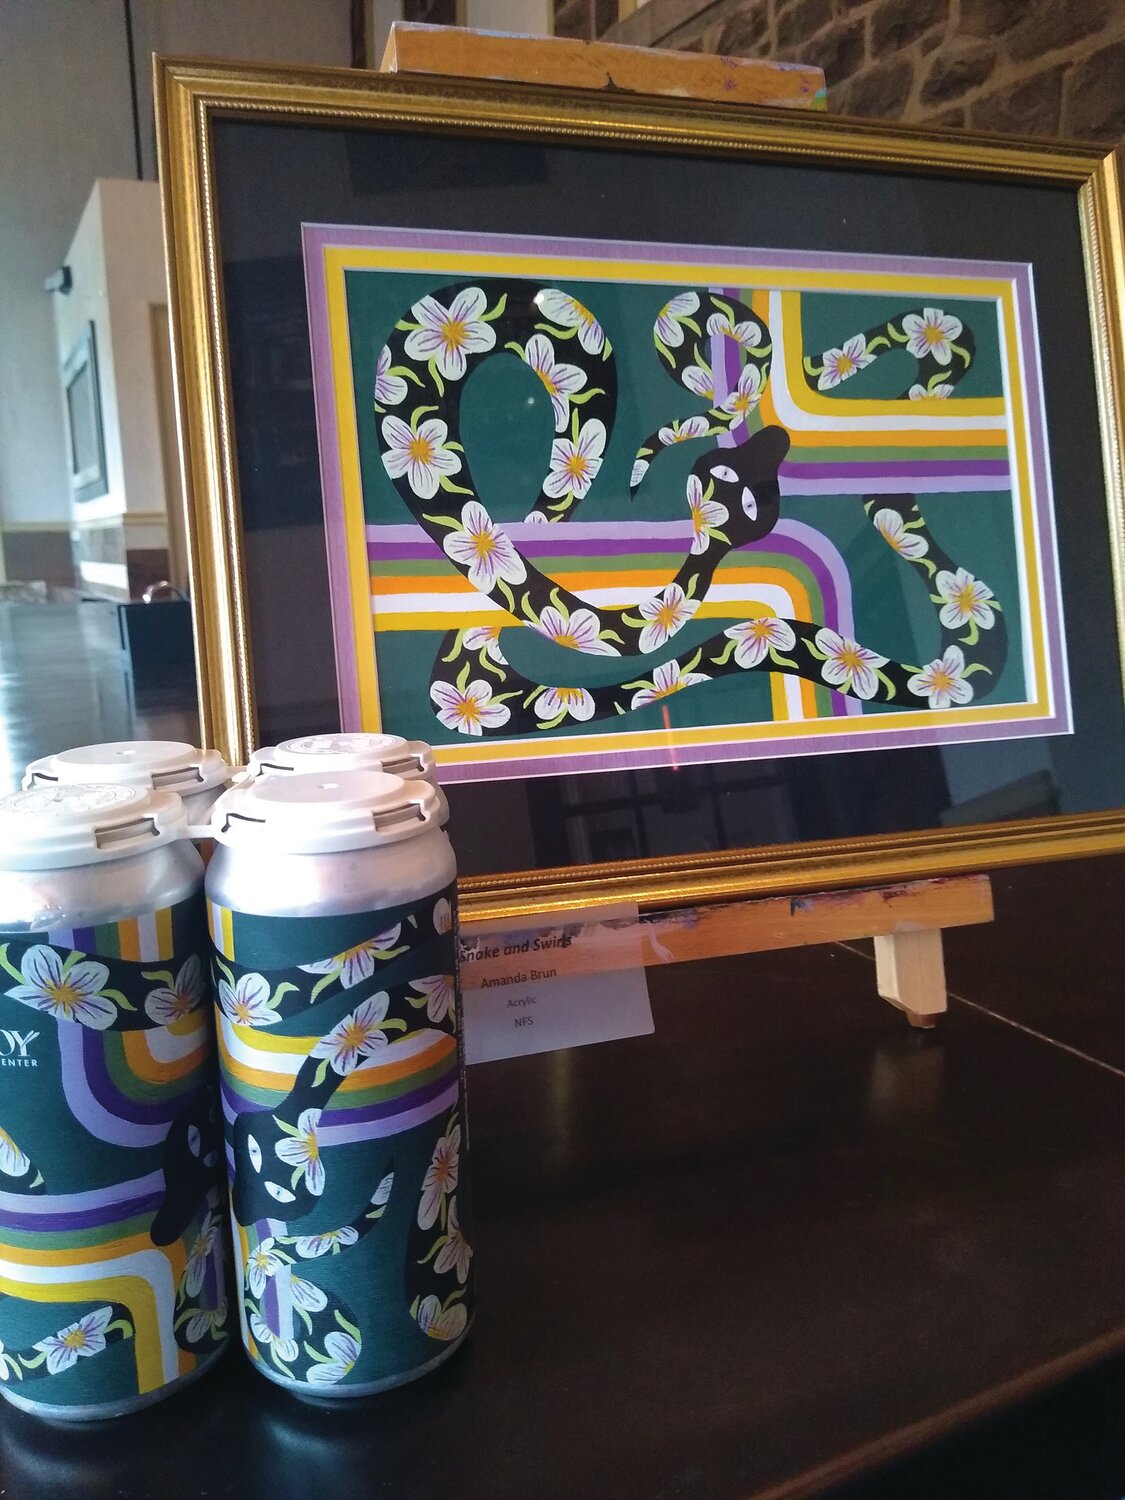 AOY Art Center member artist Amanda Brun of Yardley won the Craft Beer Can Design Contest for her "Snake and Swirls" design for Vault Brewing’s limited edition of its Teller Pilsner.